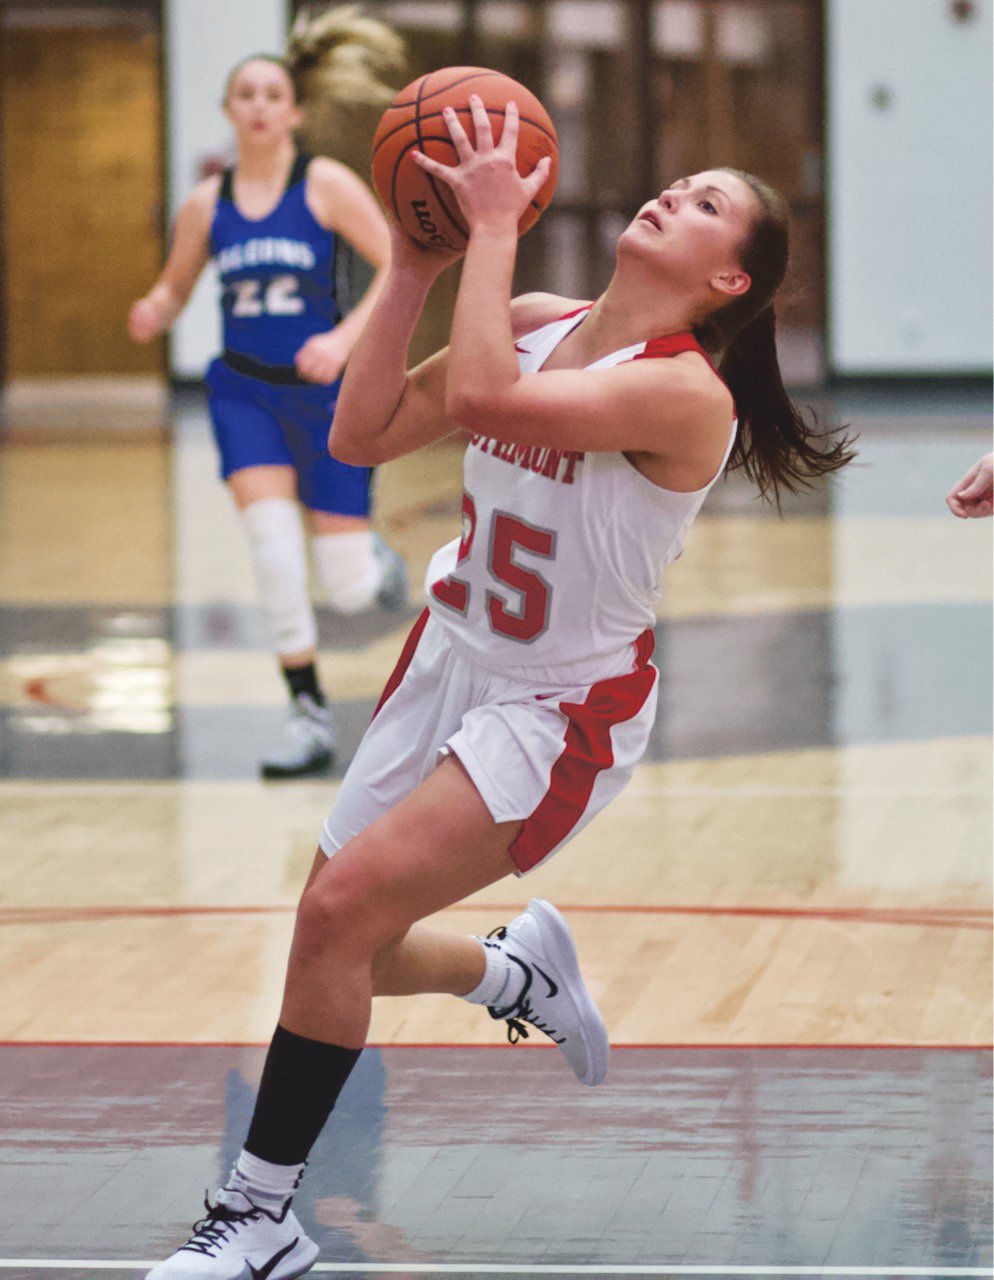 Natalie Manion had 10 points for the Mounties in their win over North Vermillion.